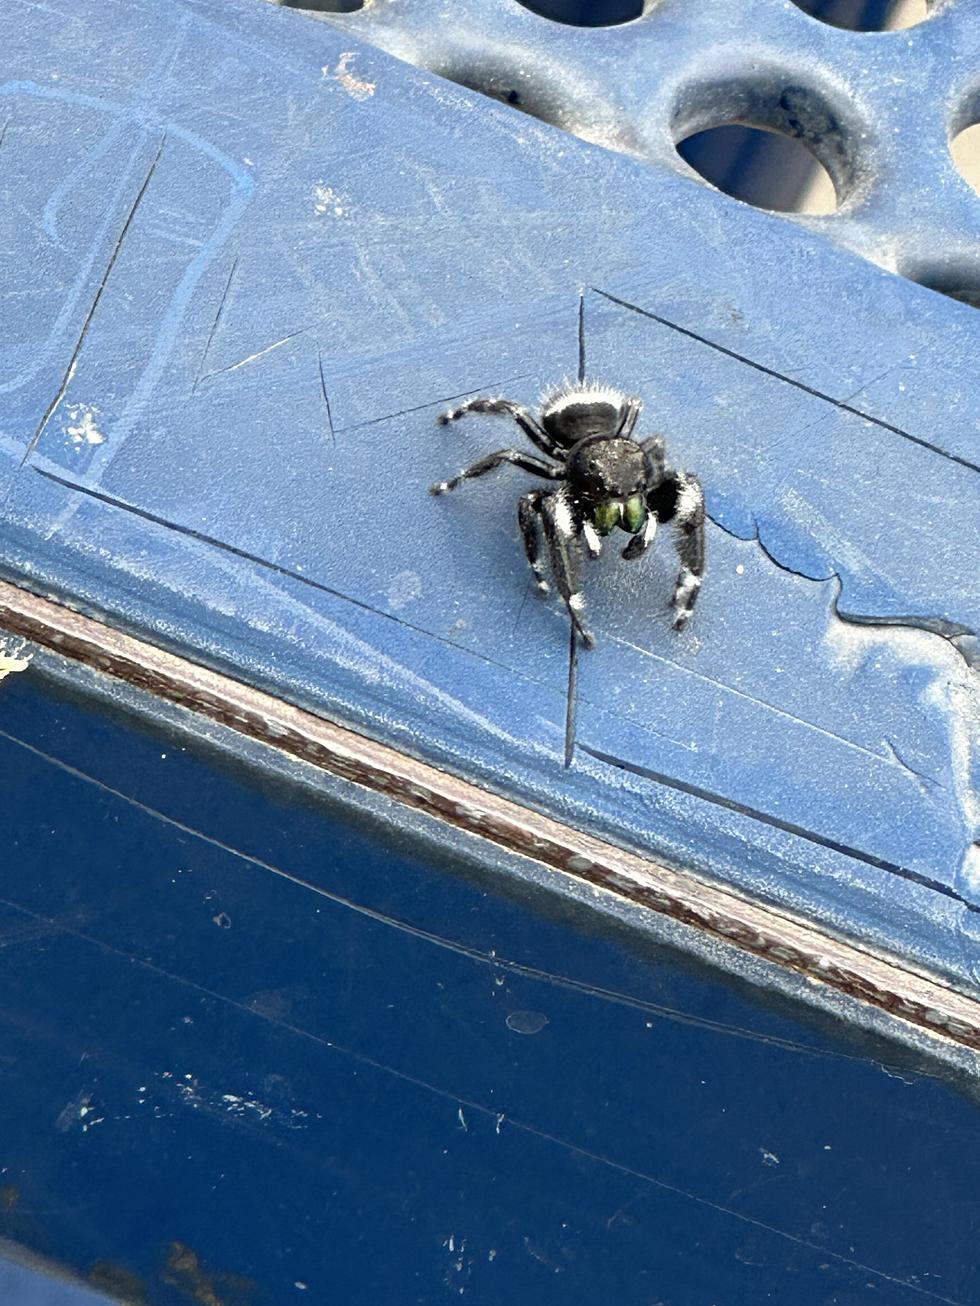 Have You Ever Seen Wyoming’s Daring Jumping Spider?